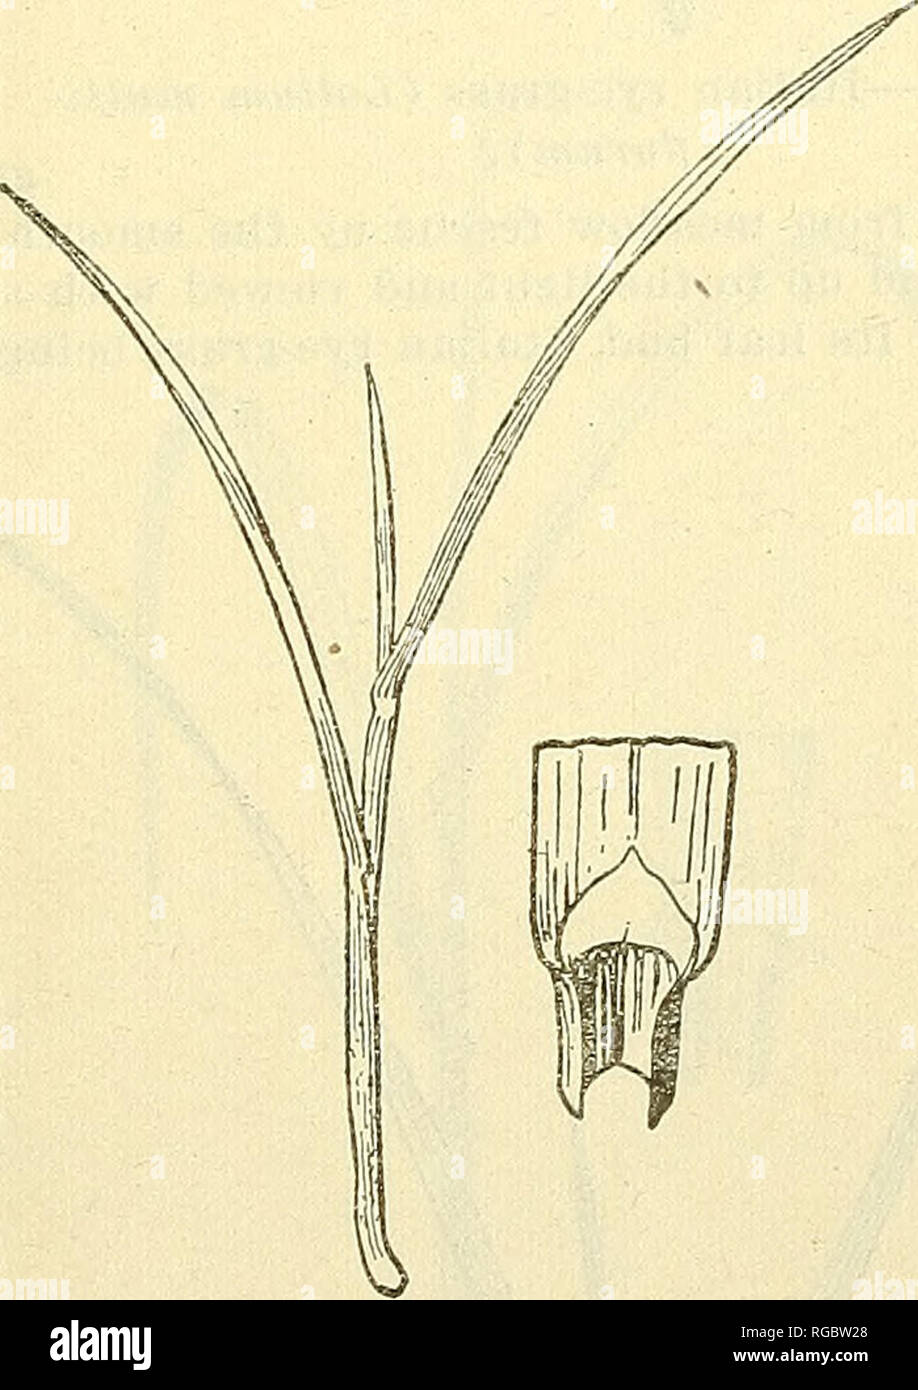 . Bulletin of the U.S. Department of Agriculture. Agriculture; Agriculture. Fig. 16.—Kentucky bluegrass (Poa pratensis). Fig. 17. -Rough-stalked meadow grass (Poa trivialis). 12. Kentucky bluegrass (Poa pratensis; fig. 16). A dark-green perennial, creeping by rootstocks and forming a dense turf; leaves folded in the bud; collar narrow, glabrous; auricles none, ligule membranous, very short, truncate, entire; sheaths green, smooth, com- pressed ; blade long, linear, less than one-eighth inch wide, the tip abrupt pointed like the bow of a boat, dark green, but with two light lines along the midn Stock Photo